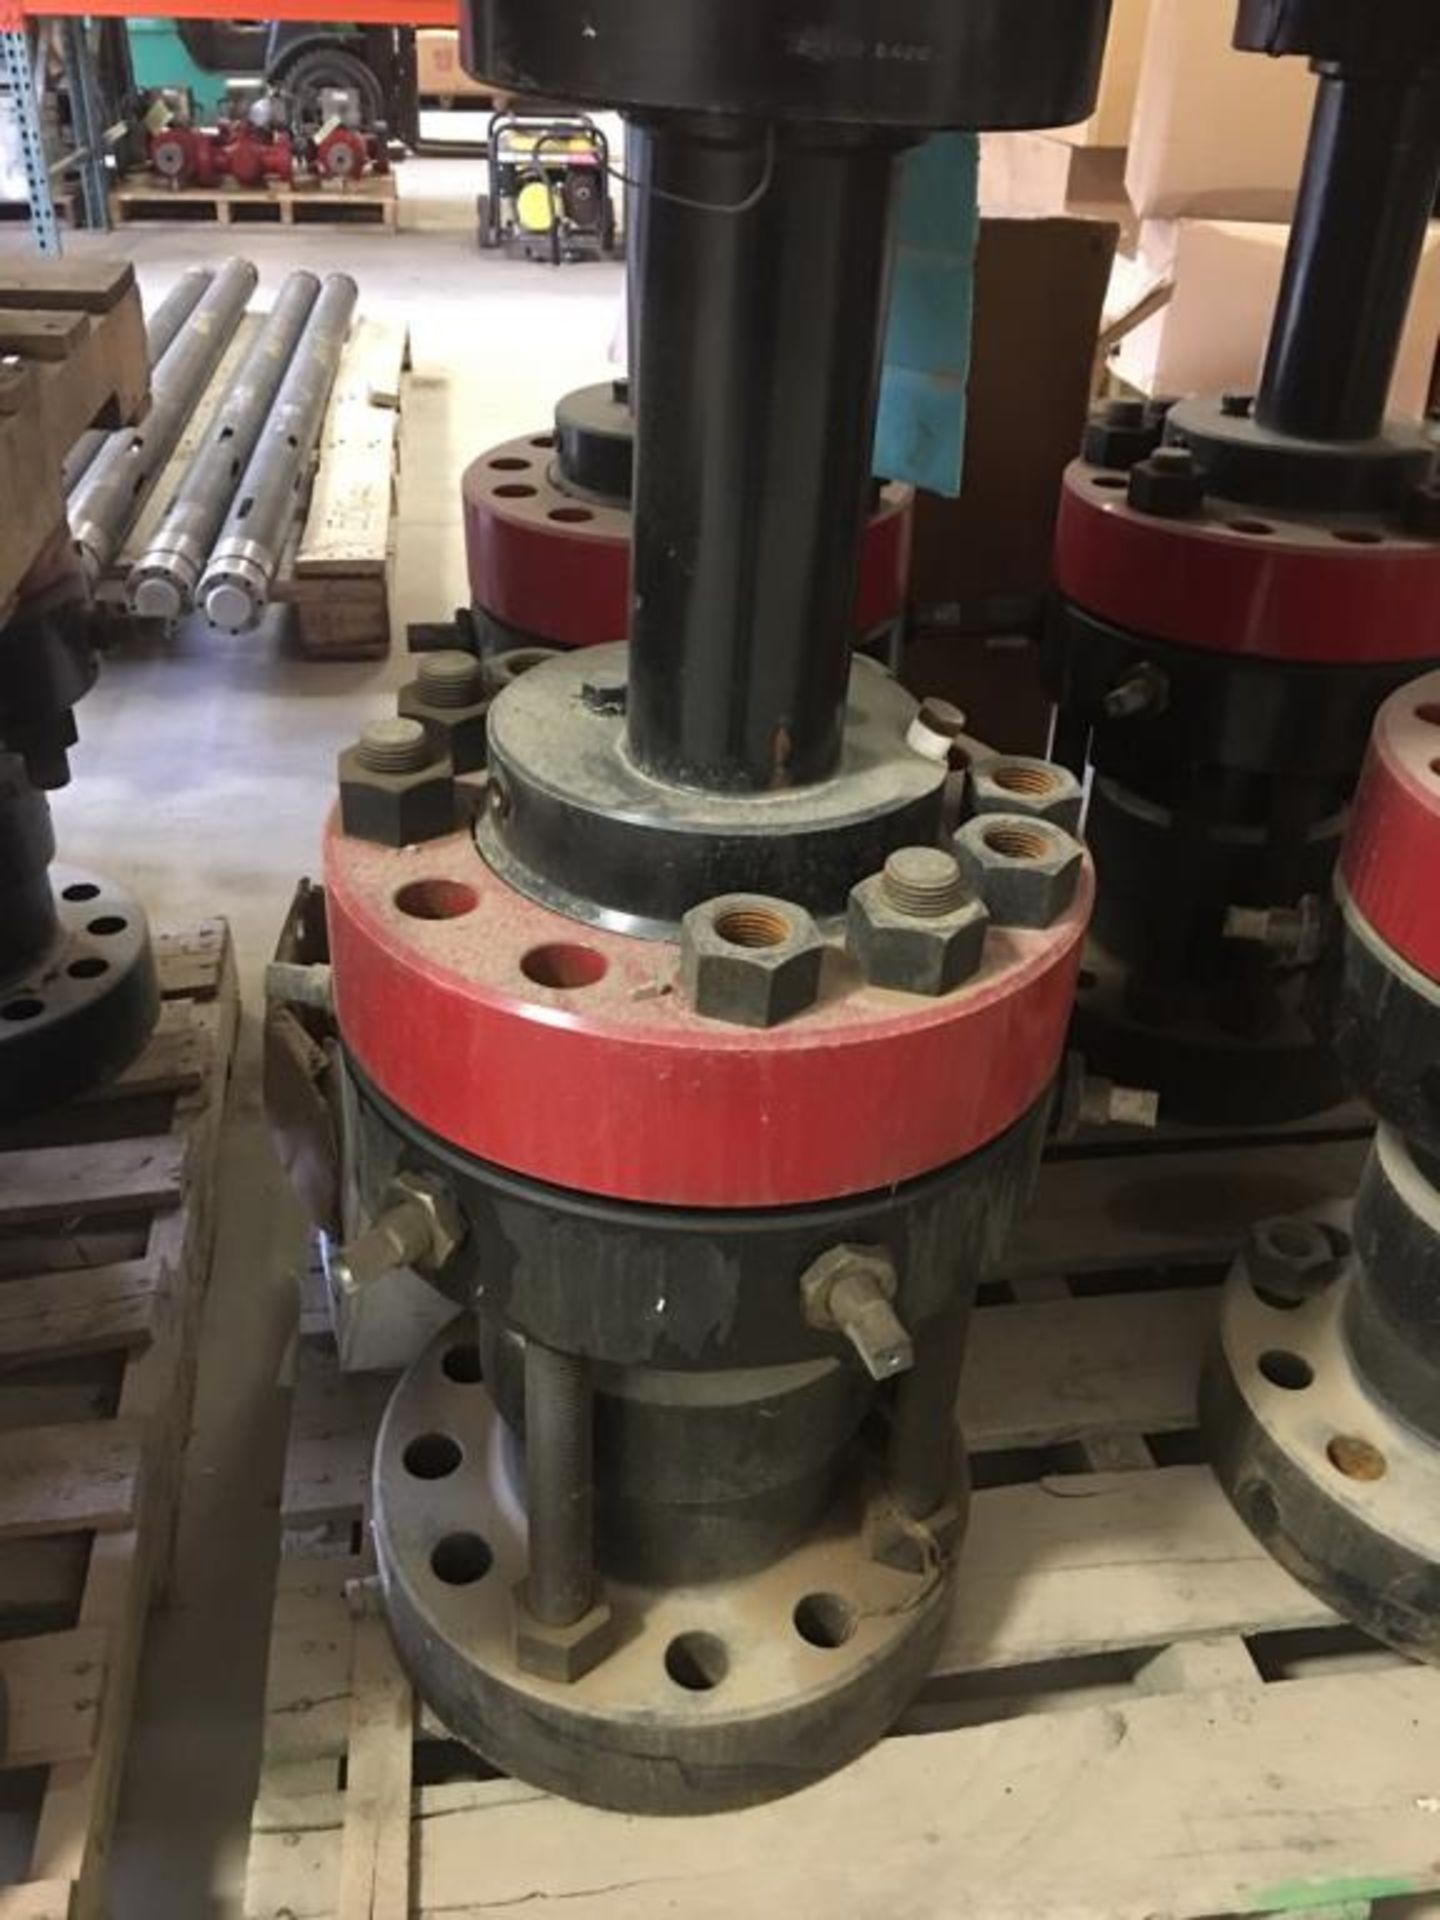 Toad Stool. Lot: (4) Consisting of GT6-5F Toad Stool, WH Adapter, 7 1/16 5M Top Rotating Flange